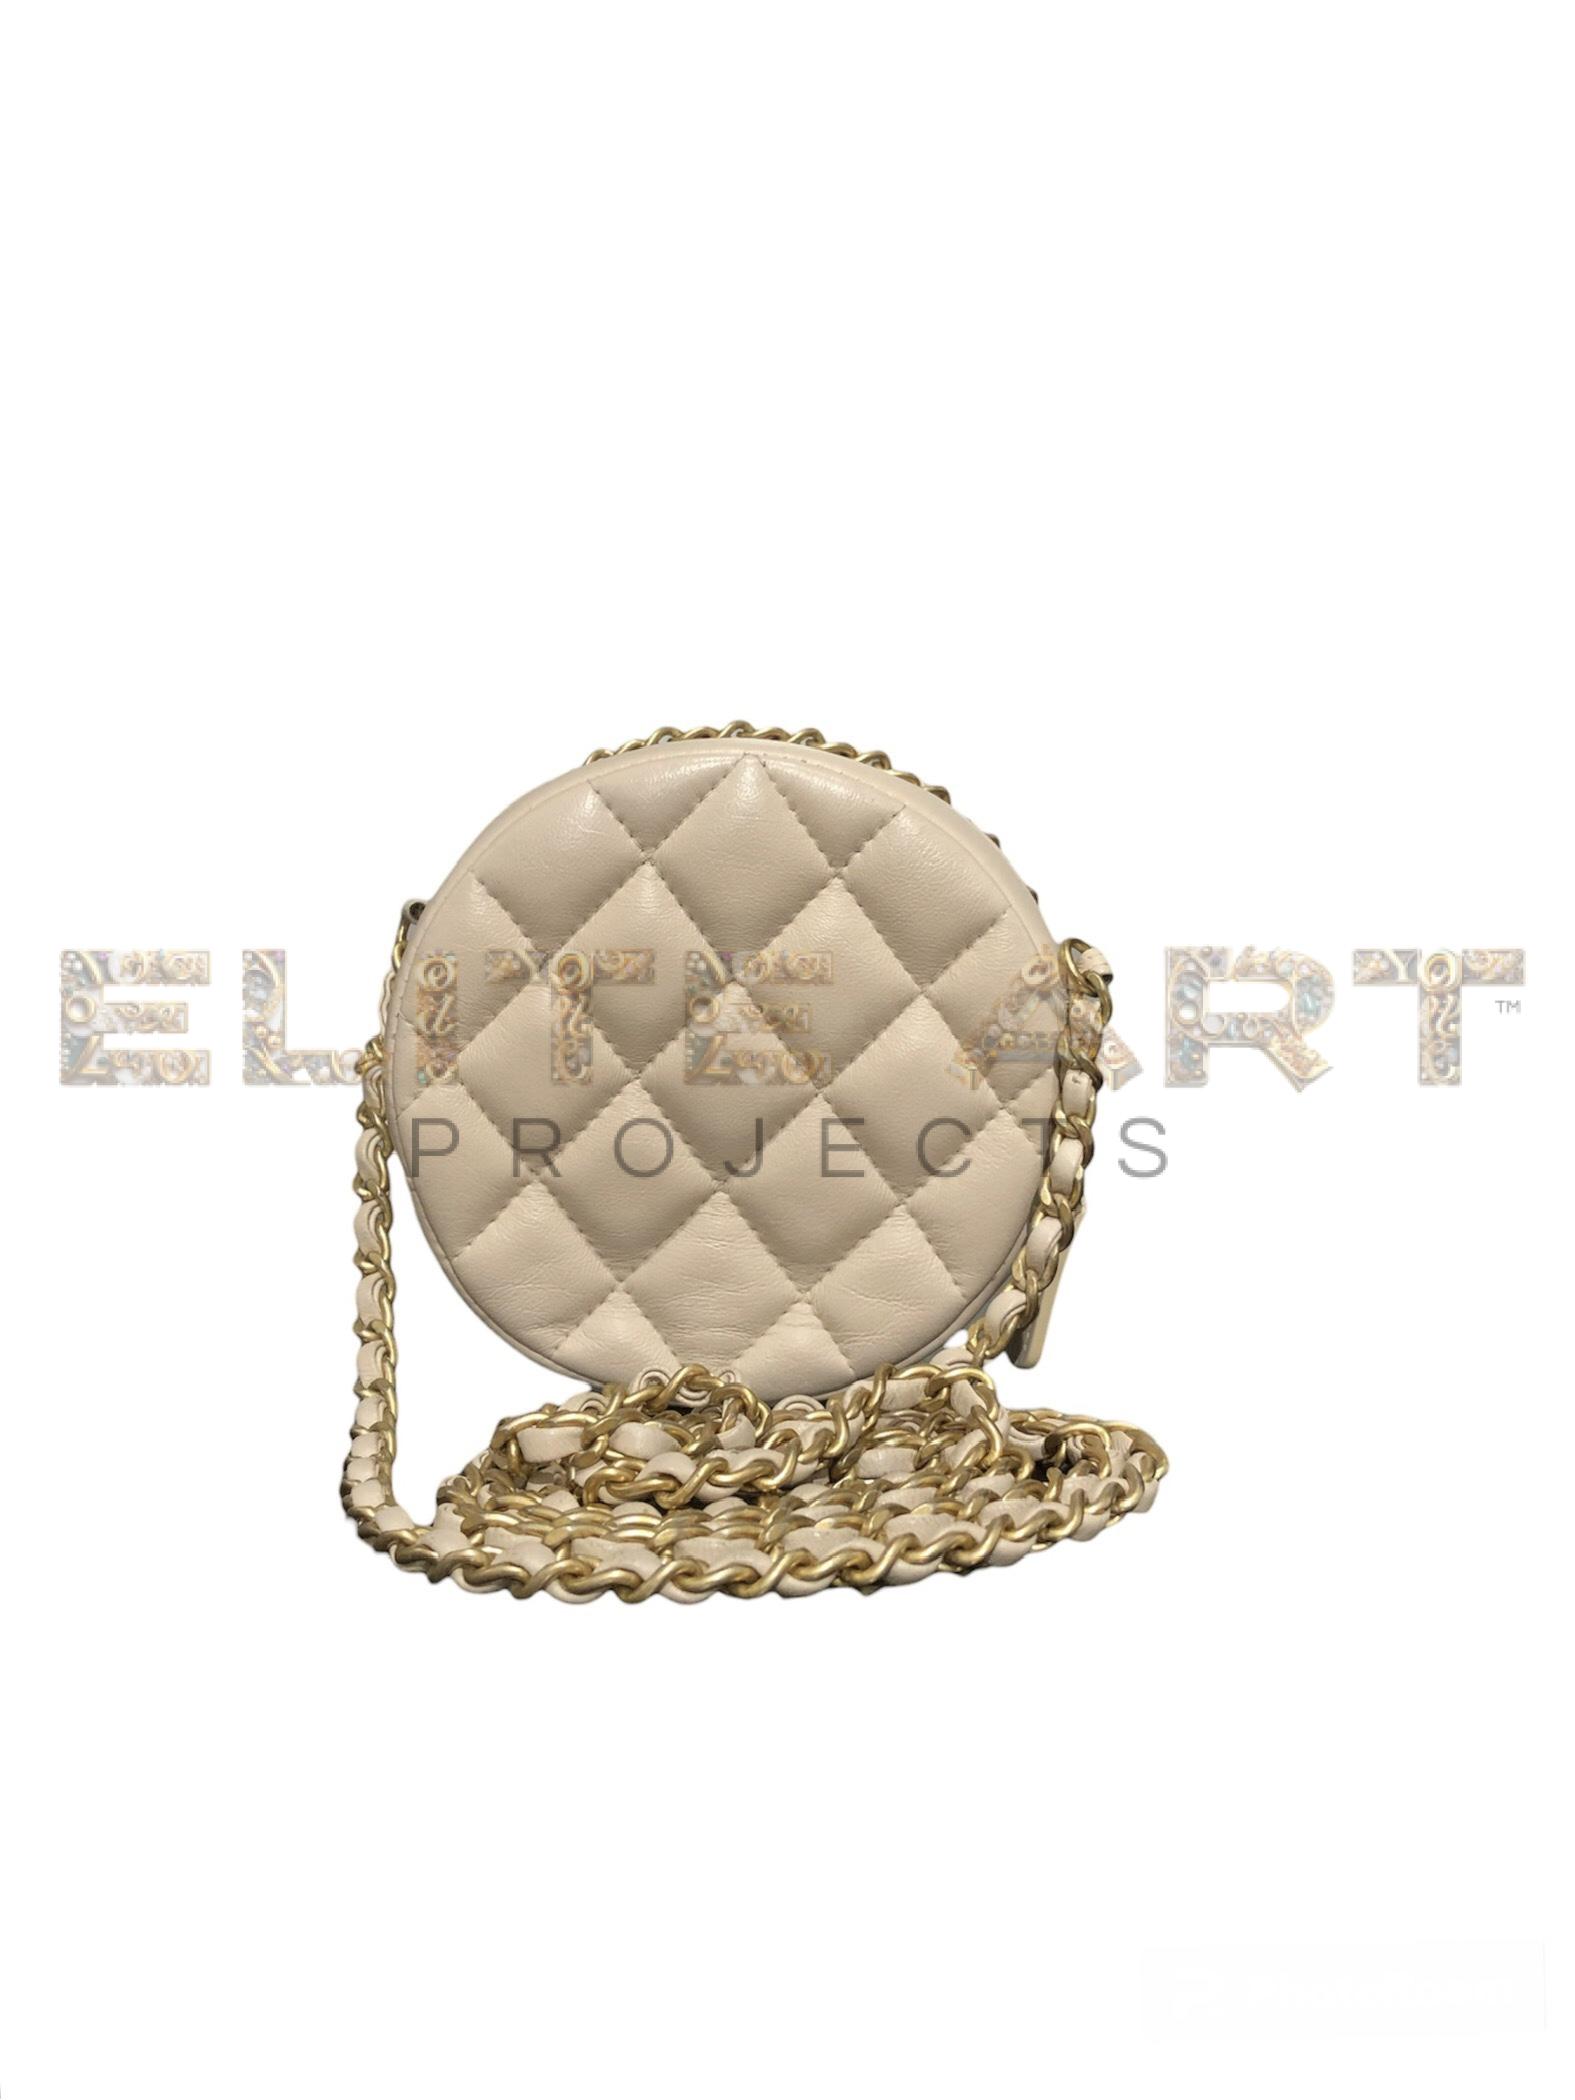 Round Bag, quilted leather, beige, gold-tone hardware, shoulder bag, crossbody, circular zip closure